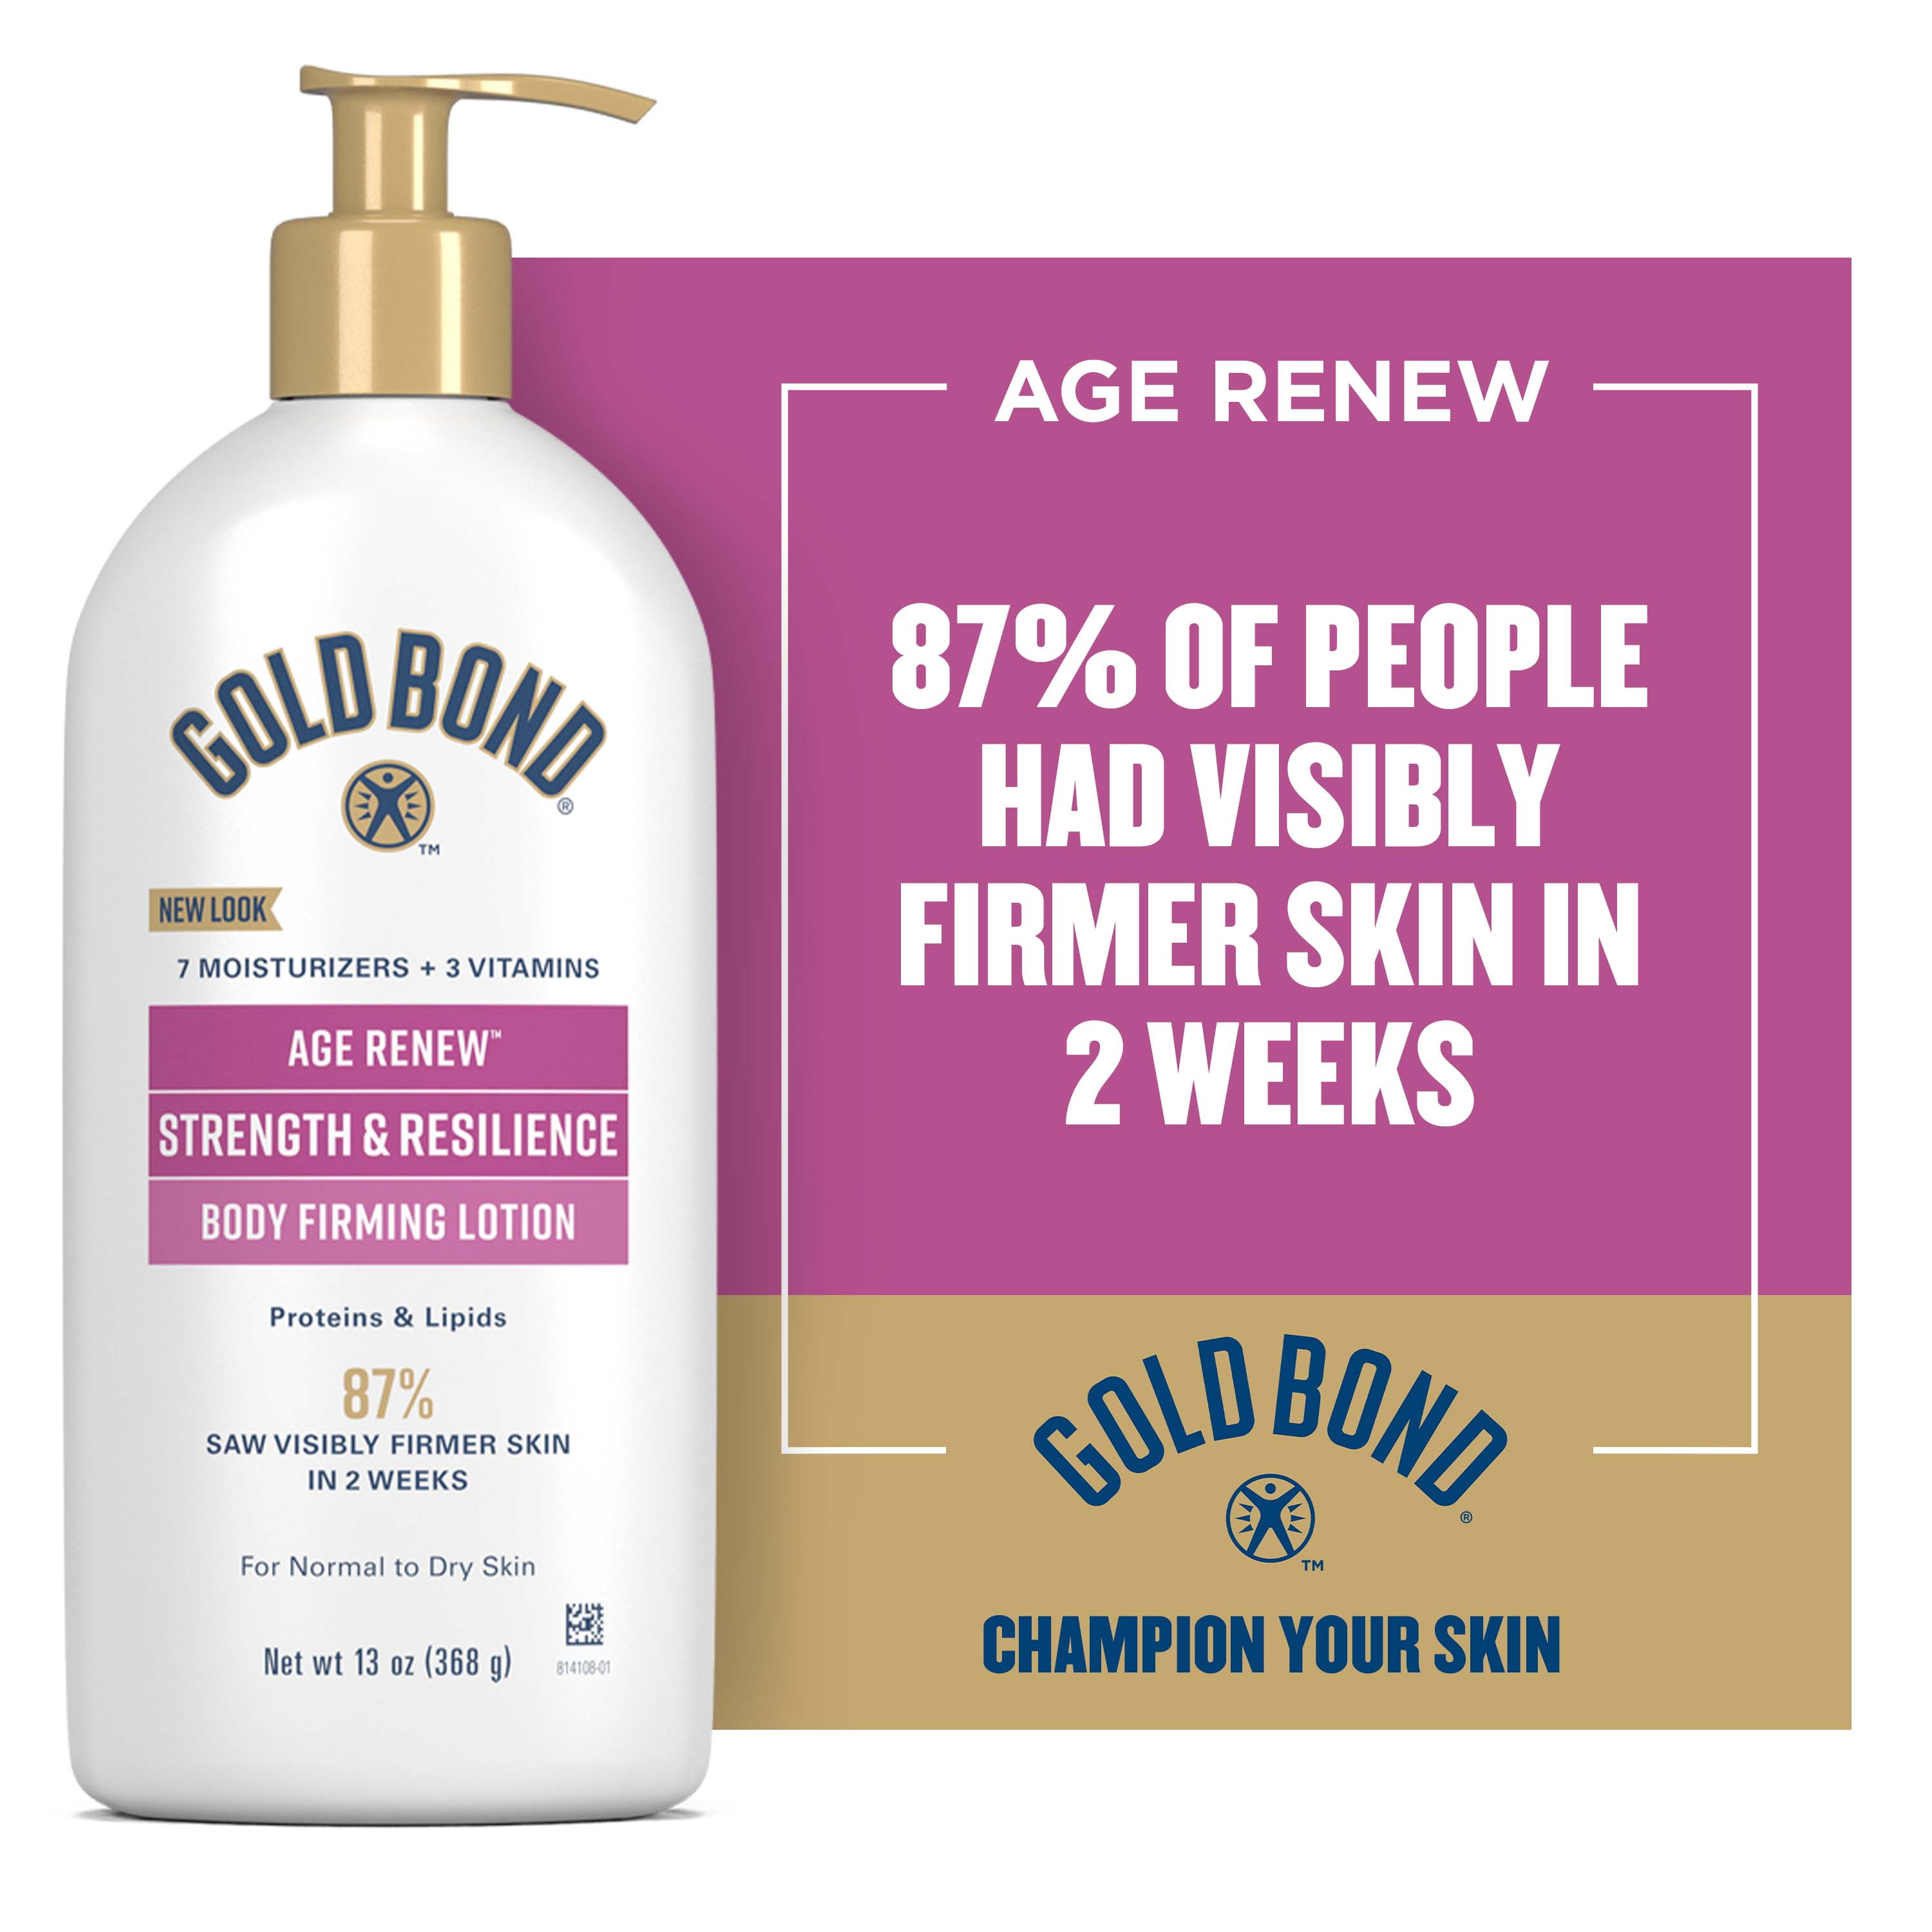 Gold Bond Age Renew Strength & Resilience Lotion, 13oz.